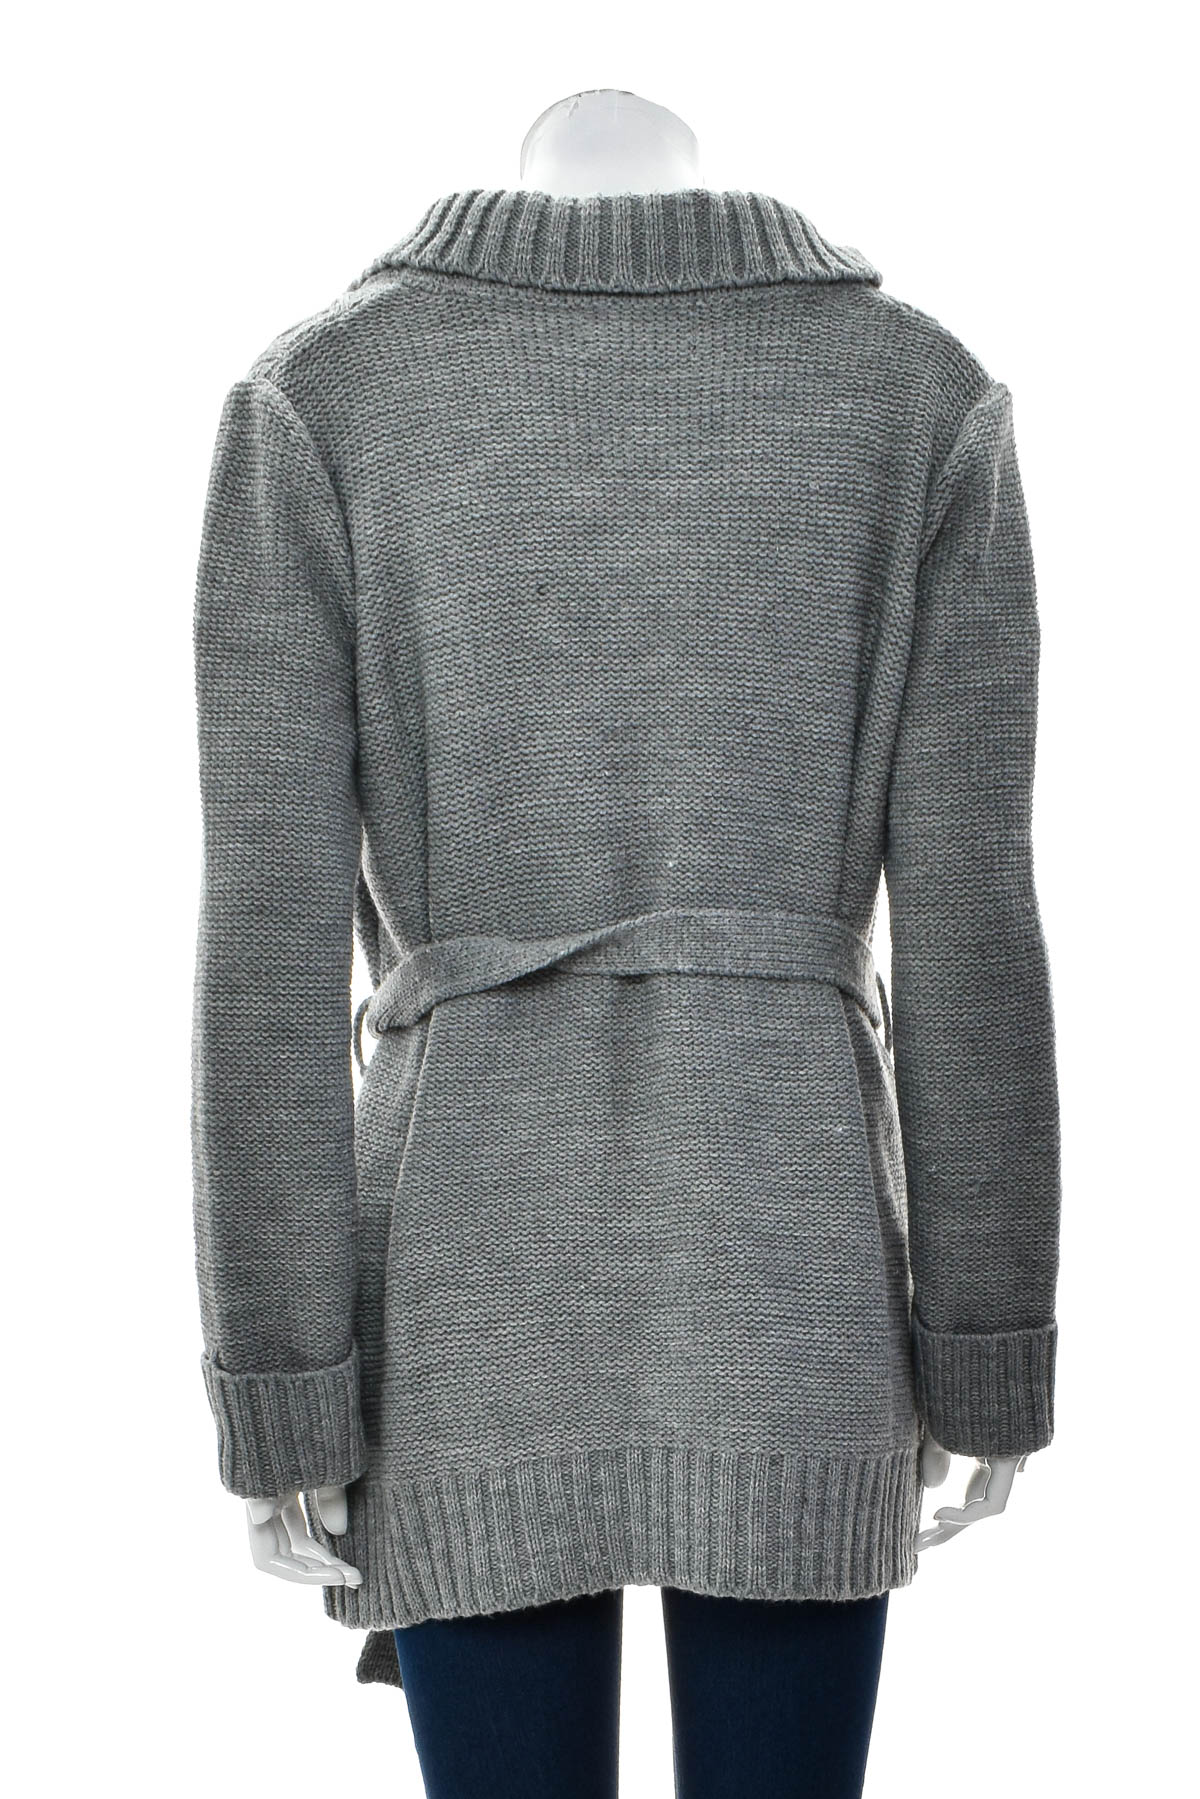 Women's cardigan - North Route - 1